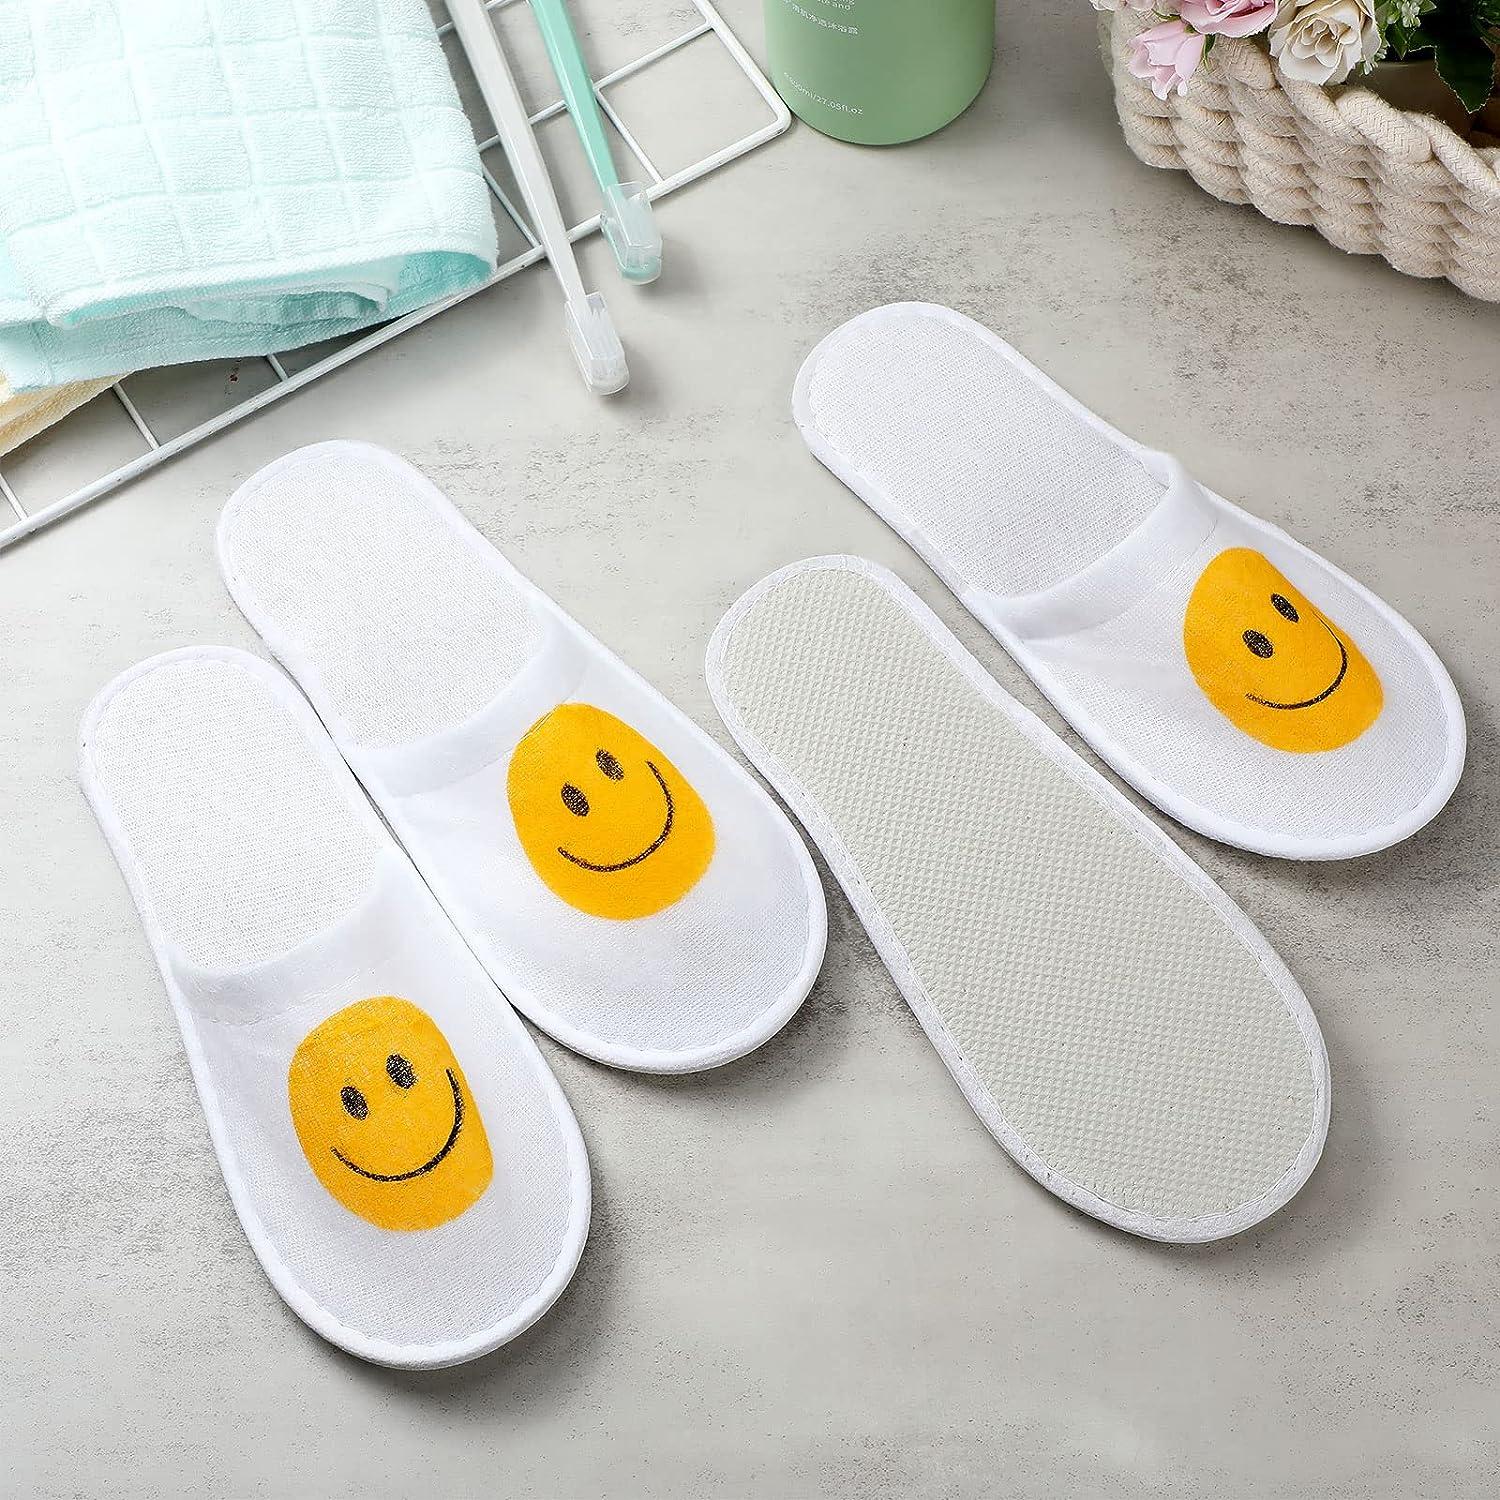 Slippers with Smiley Face Designs A Fashion Statement for Your Feet